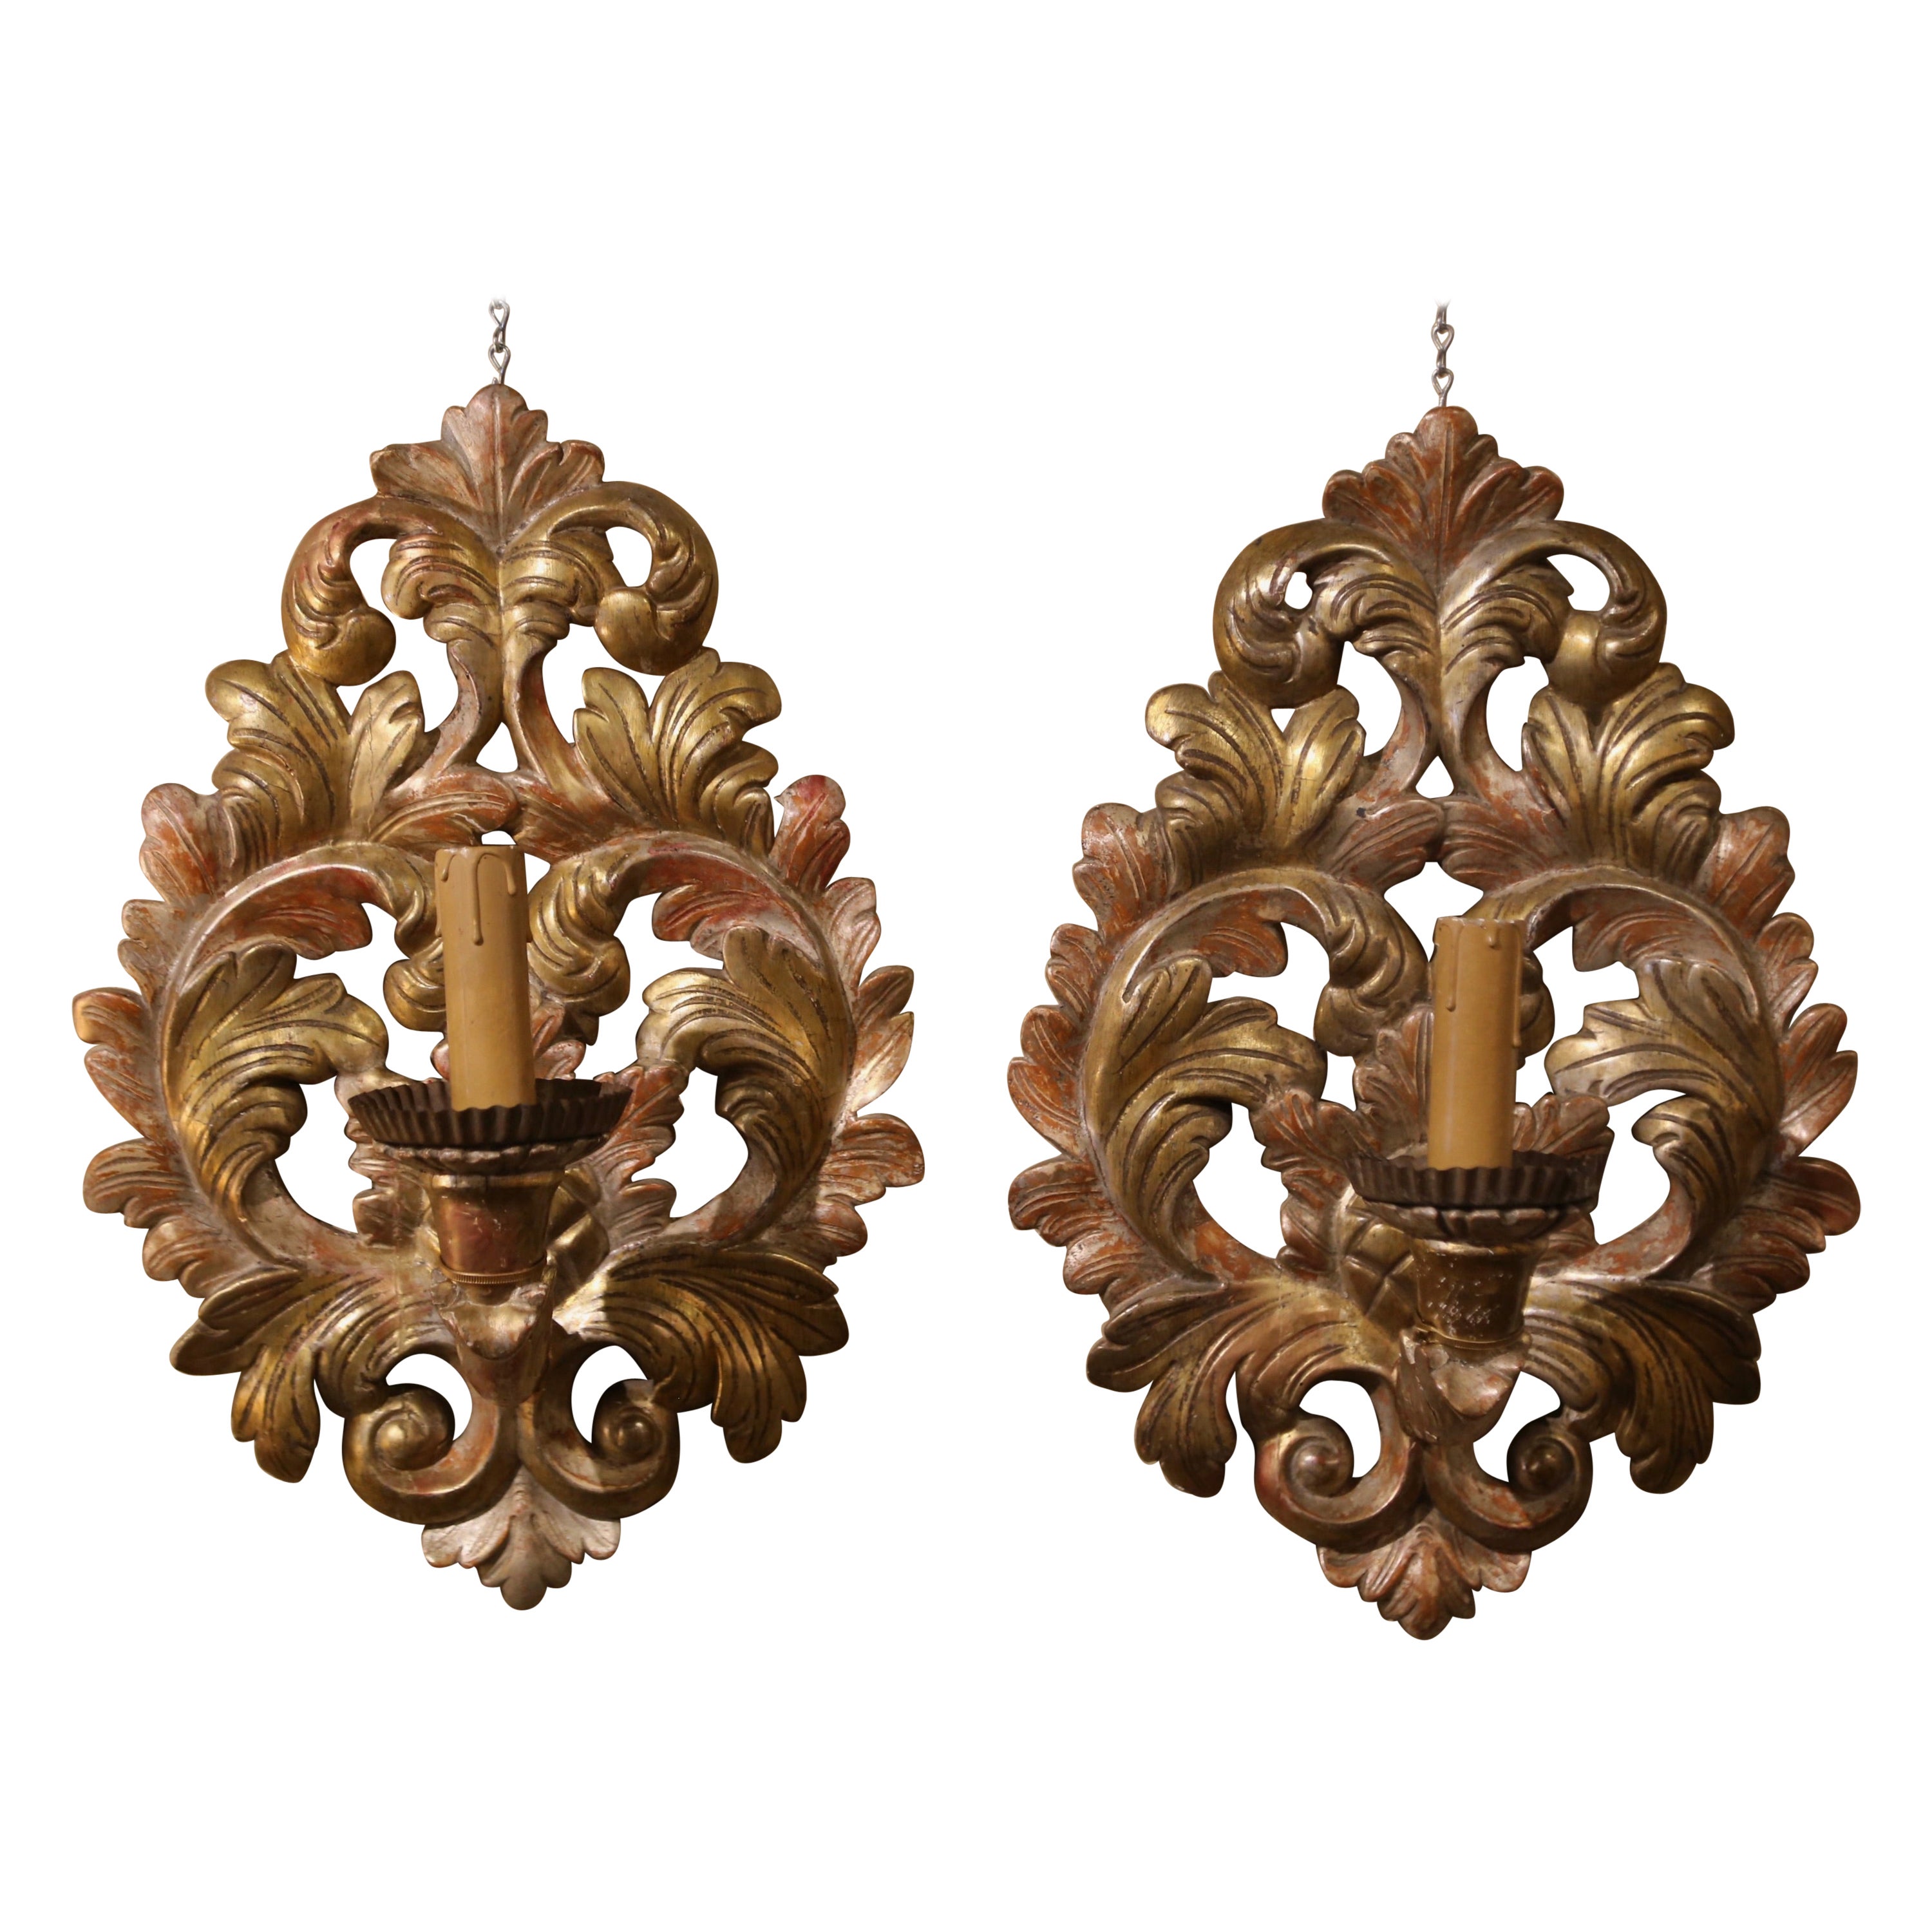 Pair of 19th Century French Carved Giltwood Wall Sconces with Leaf Motifs